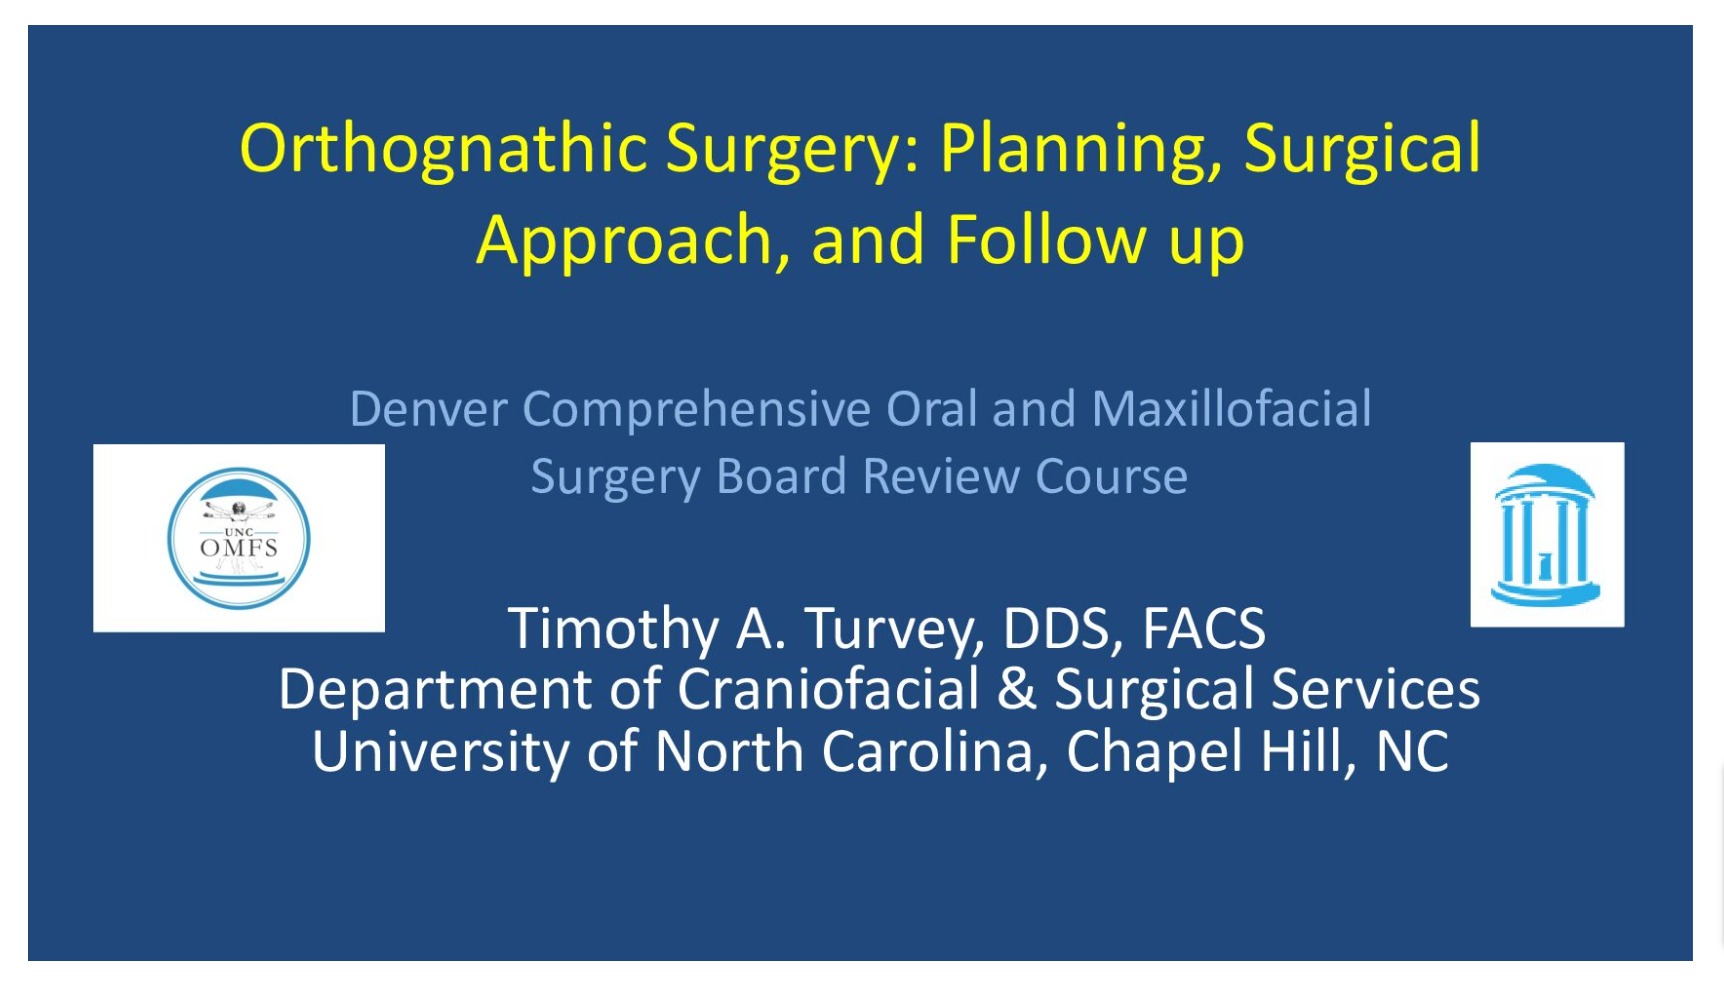 Orthognathic Surgery: Planning, Surgical Approaches and Follow-up